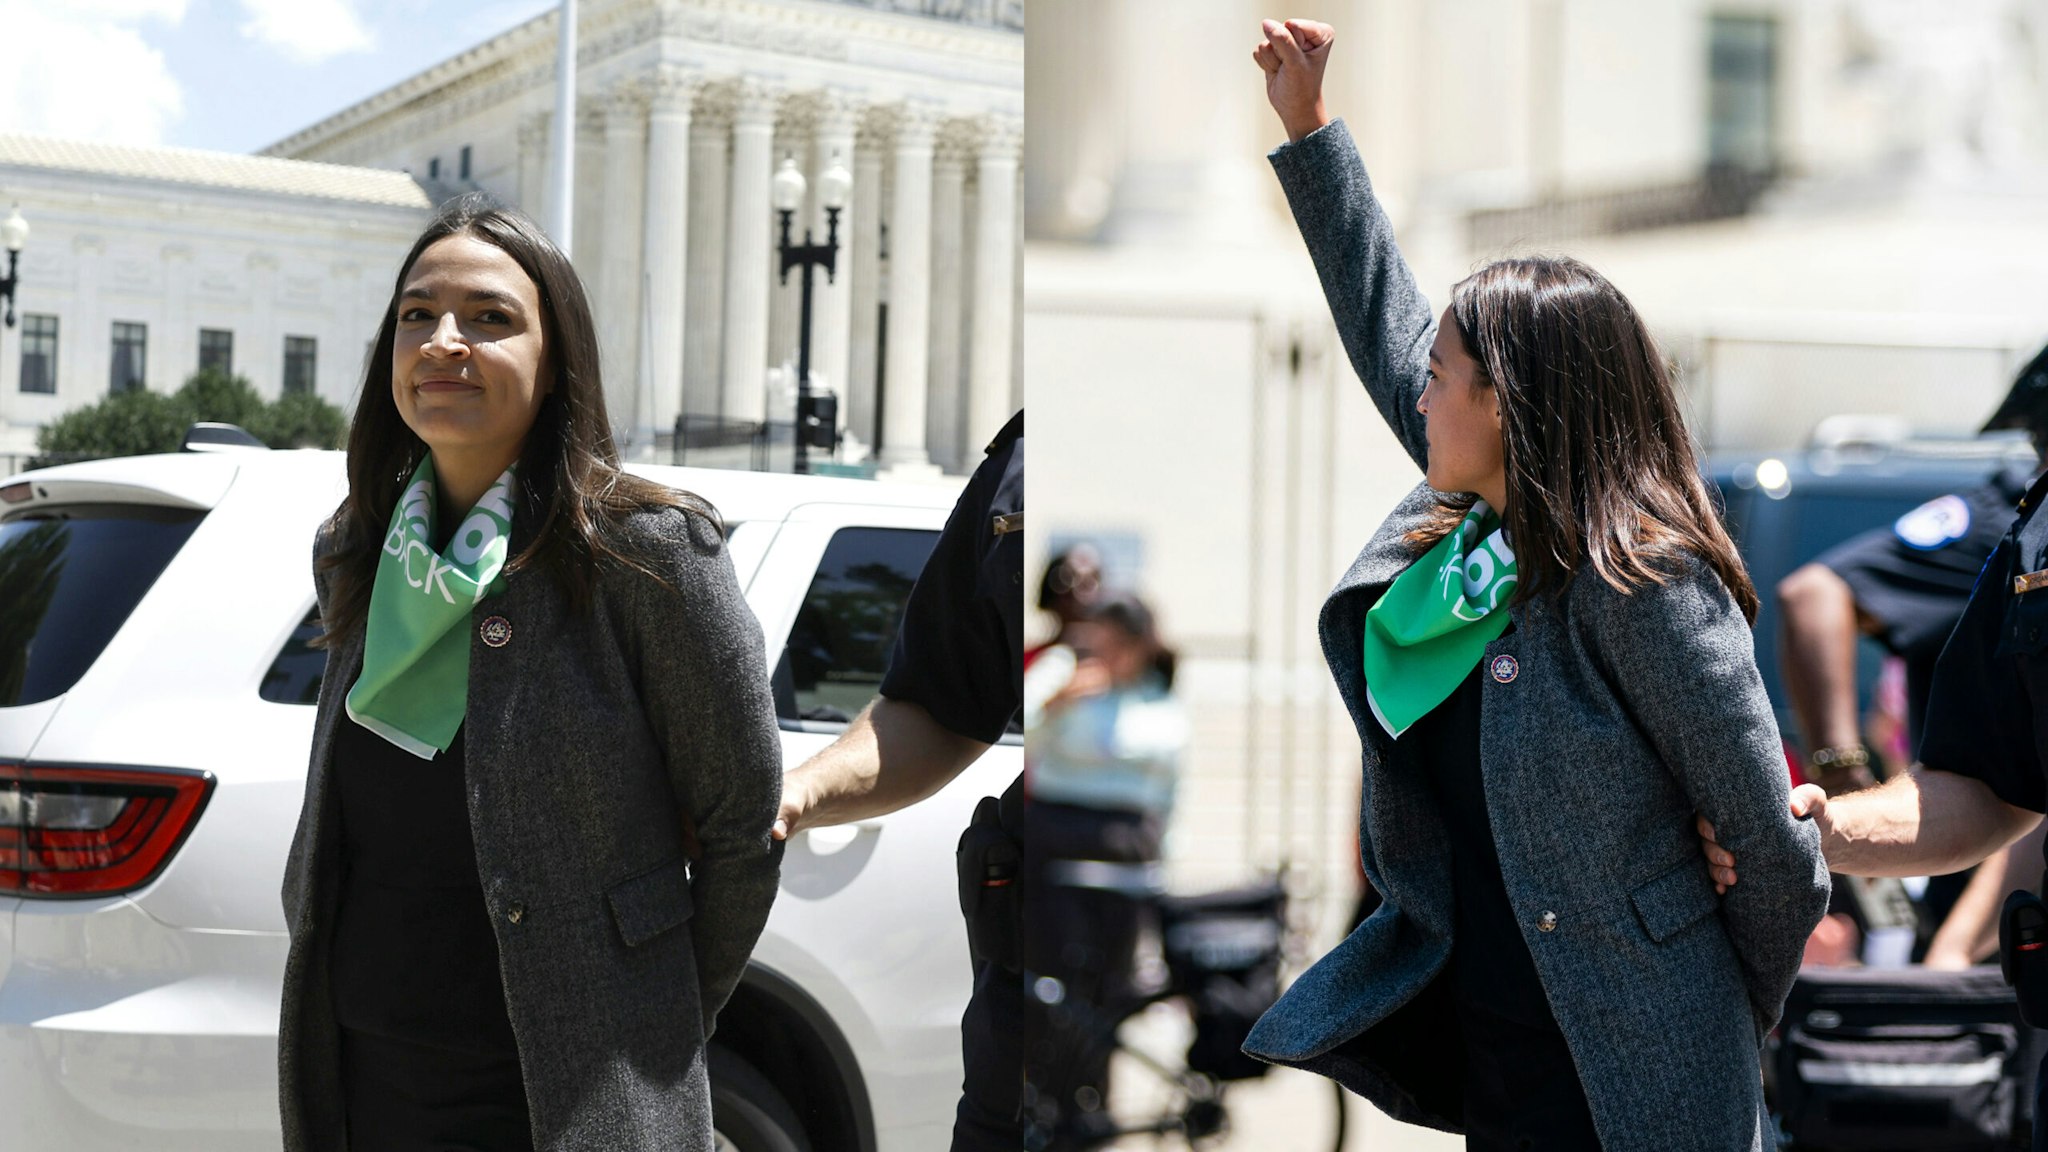 Representative Alexandria Ocasio-Cortez, a Democrat from New York, is arrested outside the US Supreme Court during a protest of the court overturning Roe v. Wade in Washington, D.C., US, on Tuesday, July 19, 2022. The high court's reversal of the 1973 landmark decision protecting the federal right to abortion has sent shock waves through the medical, legal and advocacy communities with the White House signing an executive order intended to preserve access to the procedure.